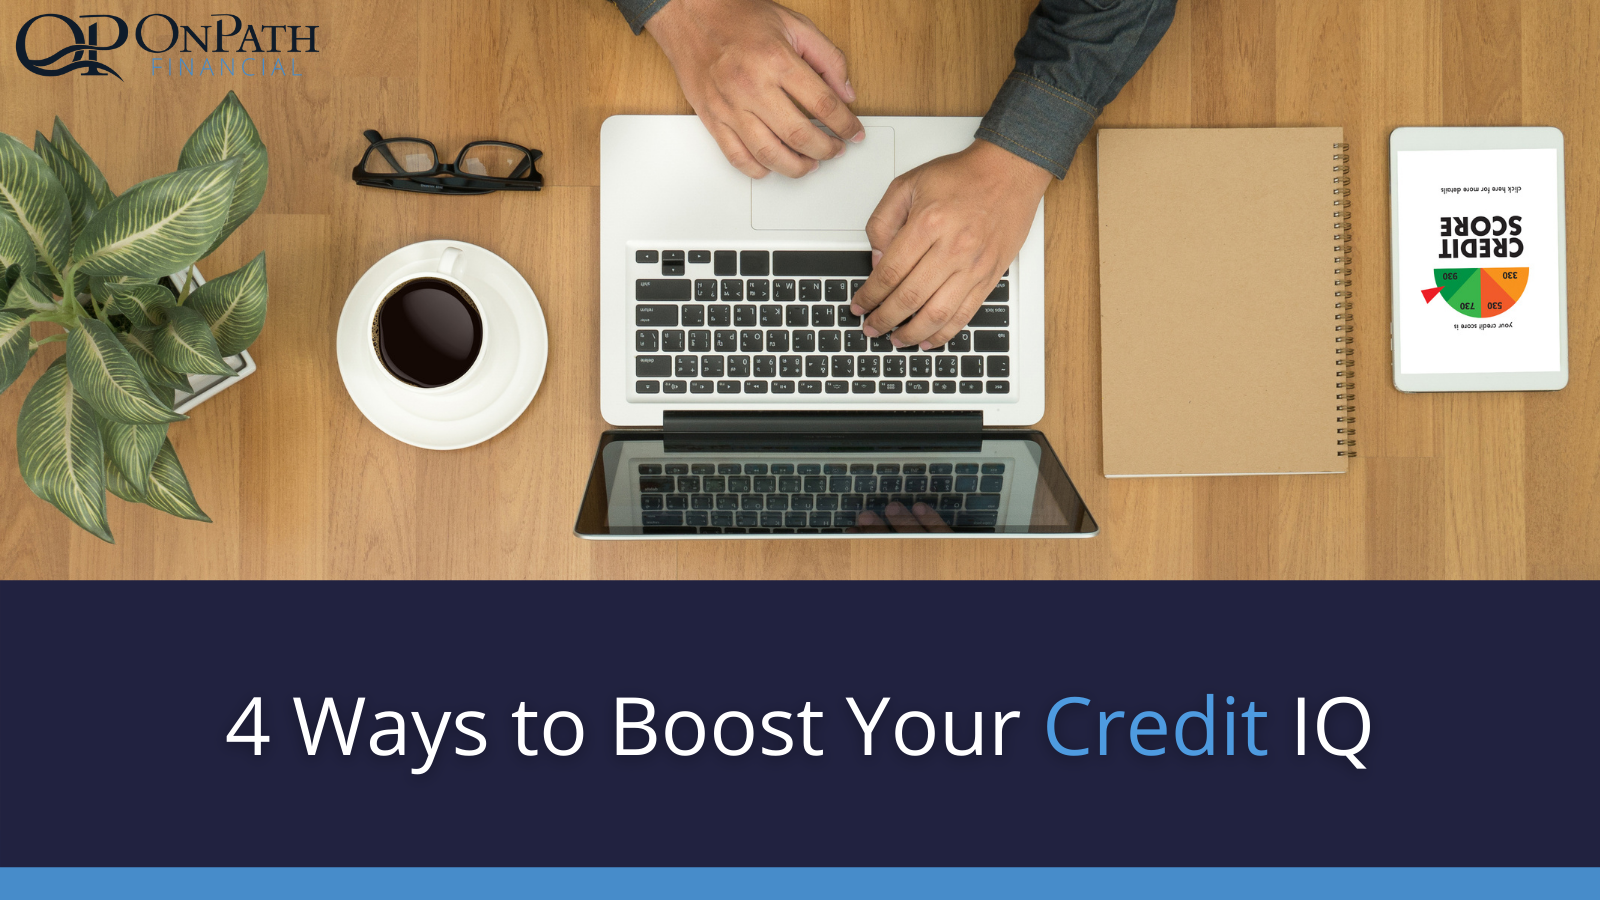 4 Ways to Boost Your Credit IQ